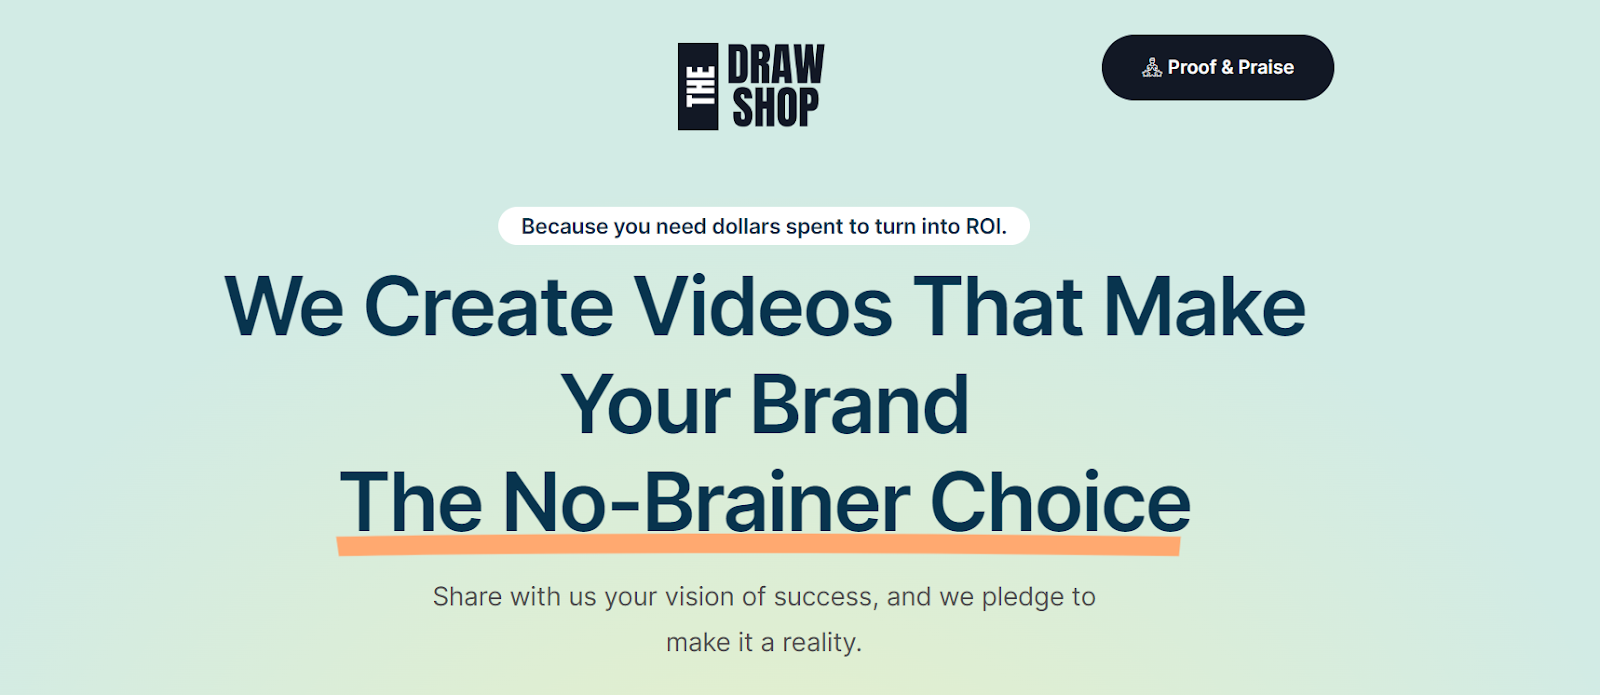 the draw shop whiteboard animation company